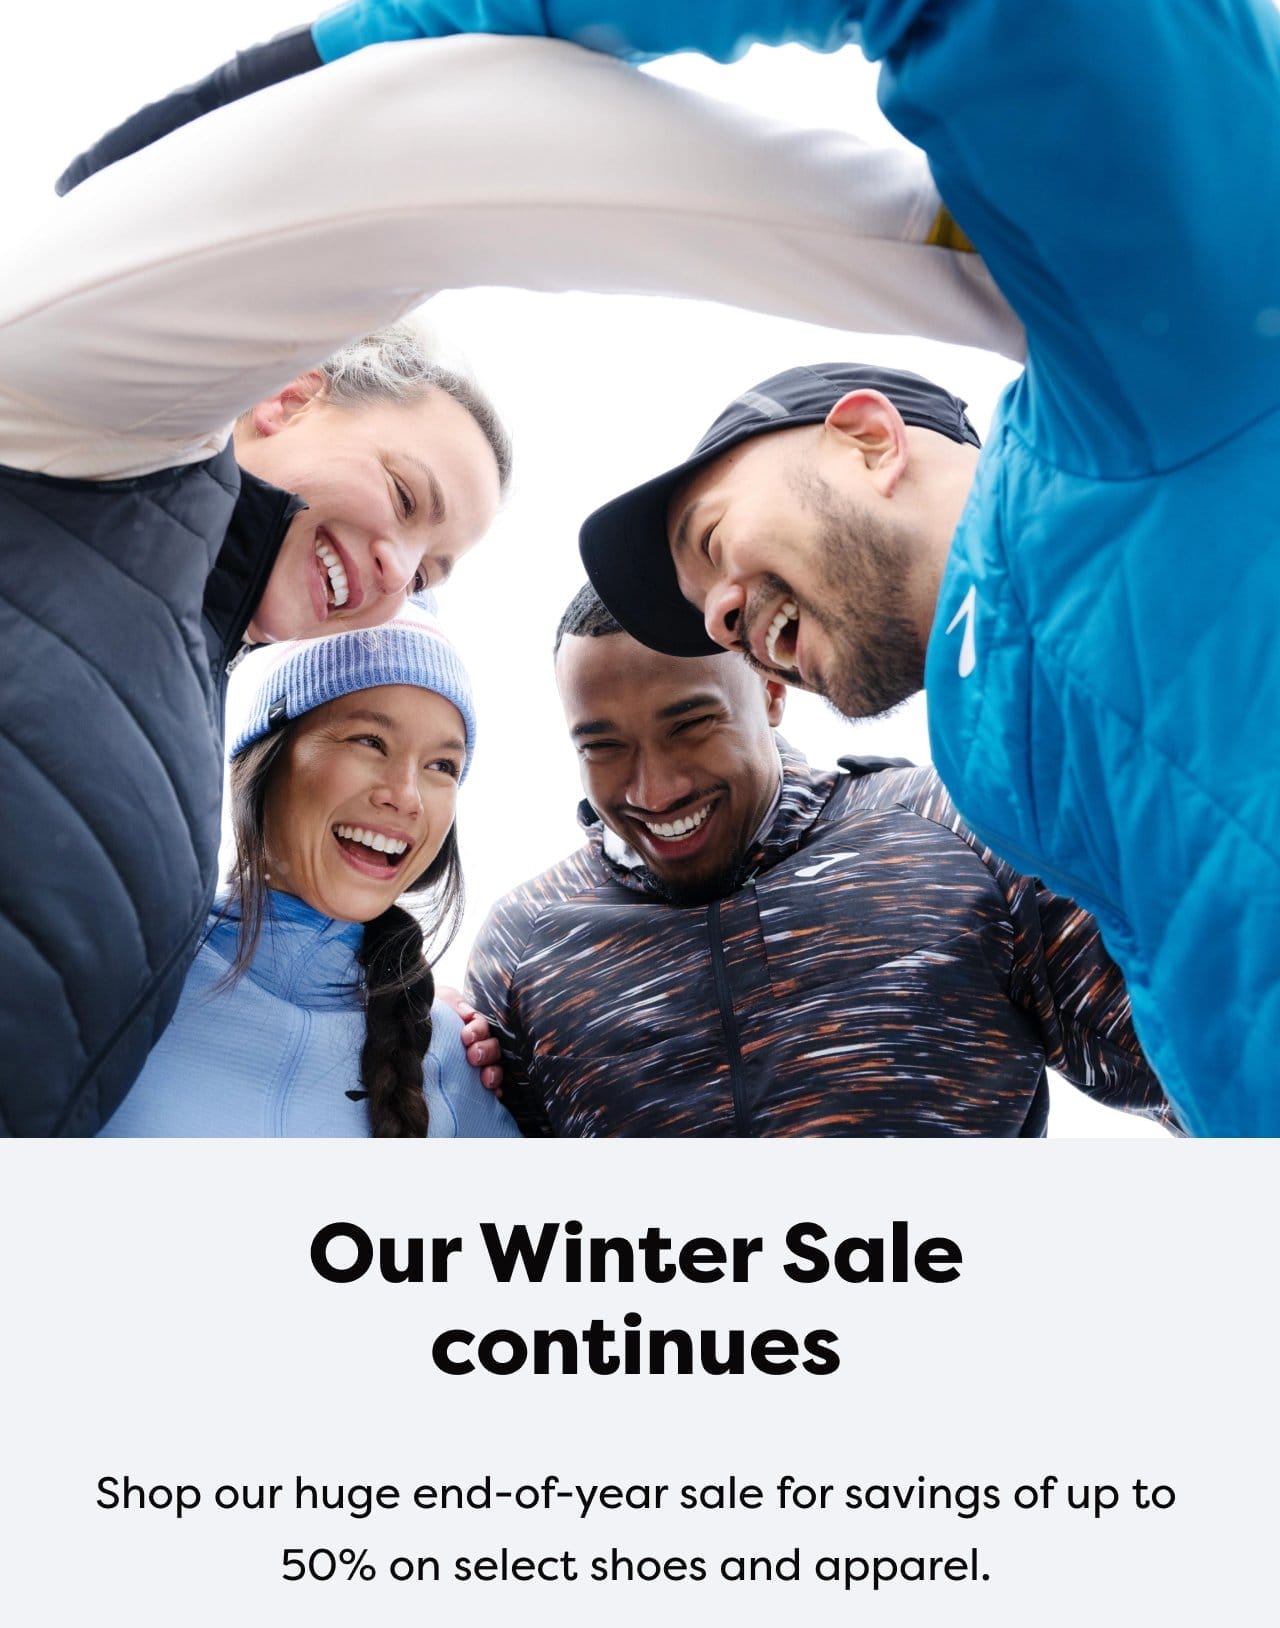 Our Winter Sale continues - Shop our huge end-of-year sale for savings of up to 50% on select shoes and apparel.